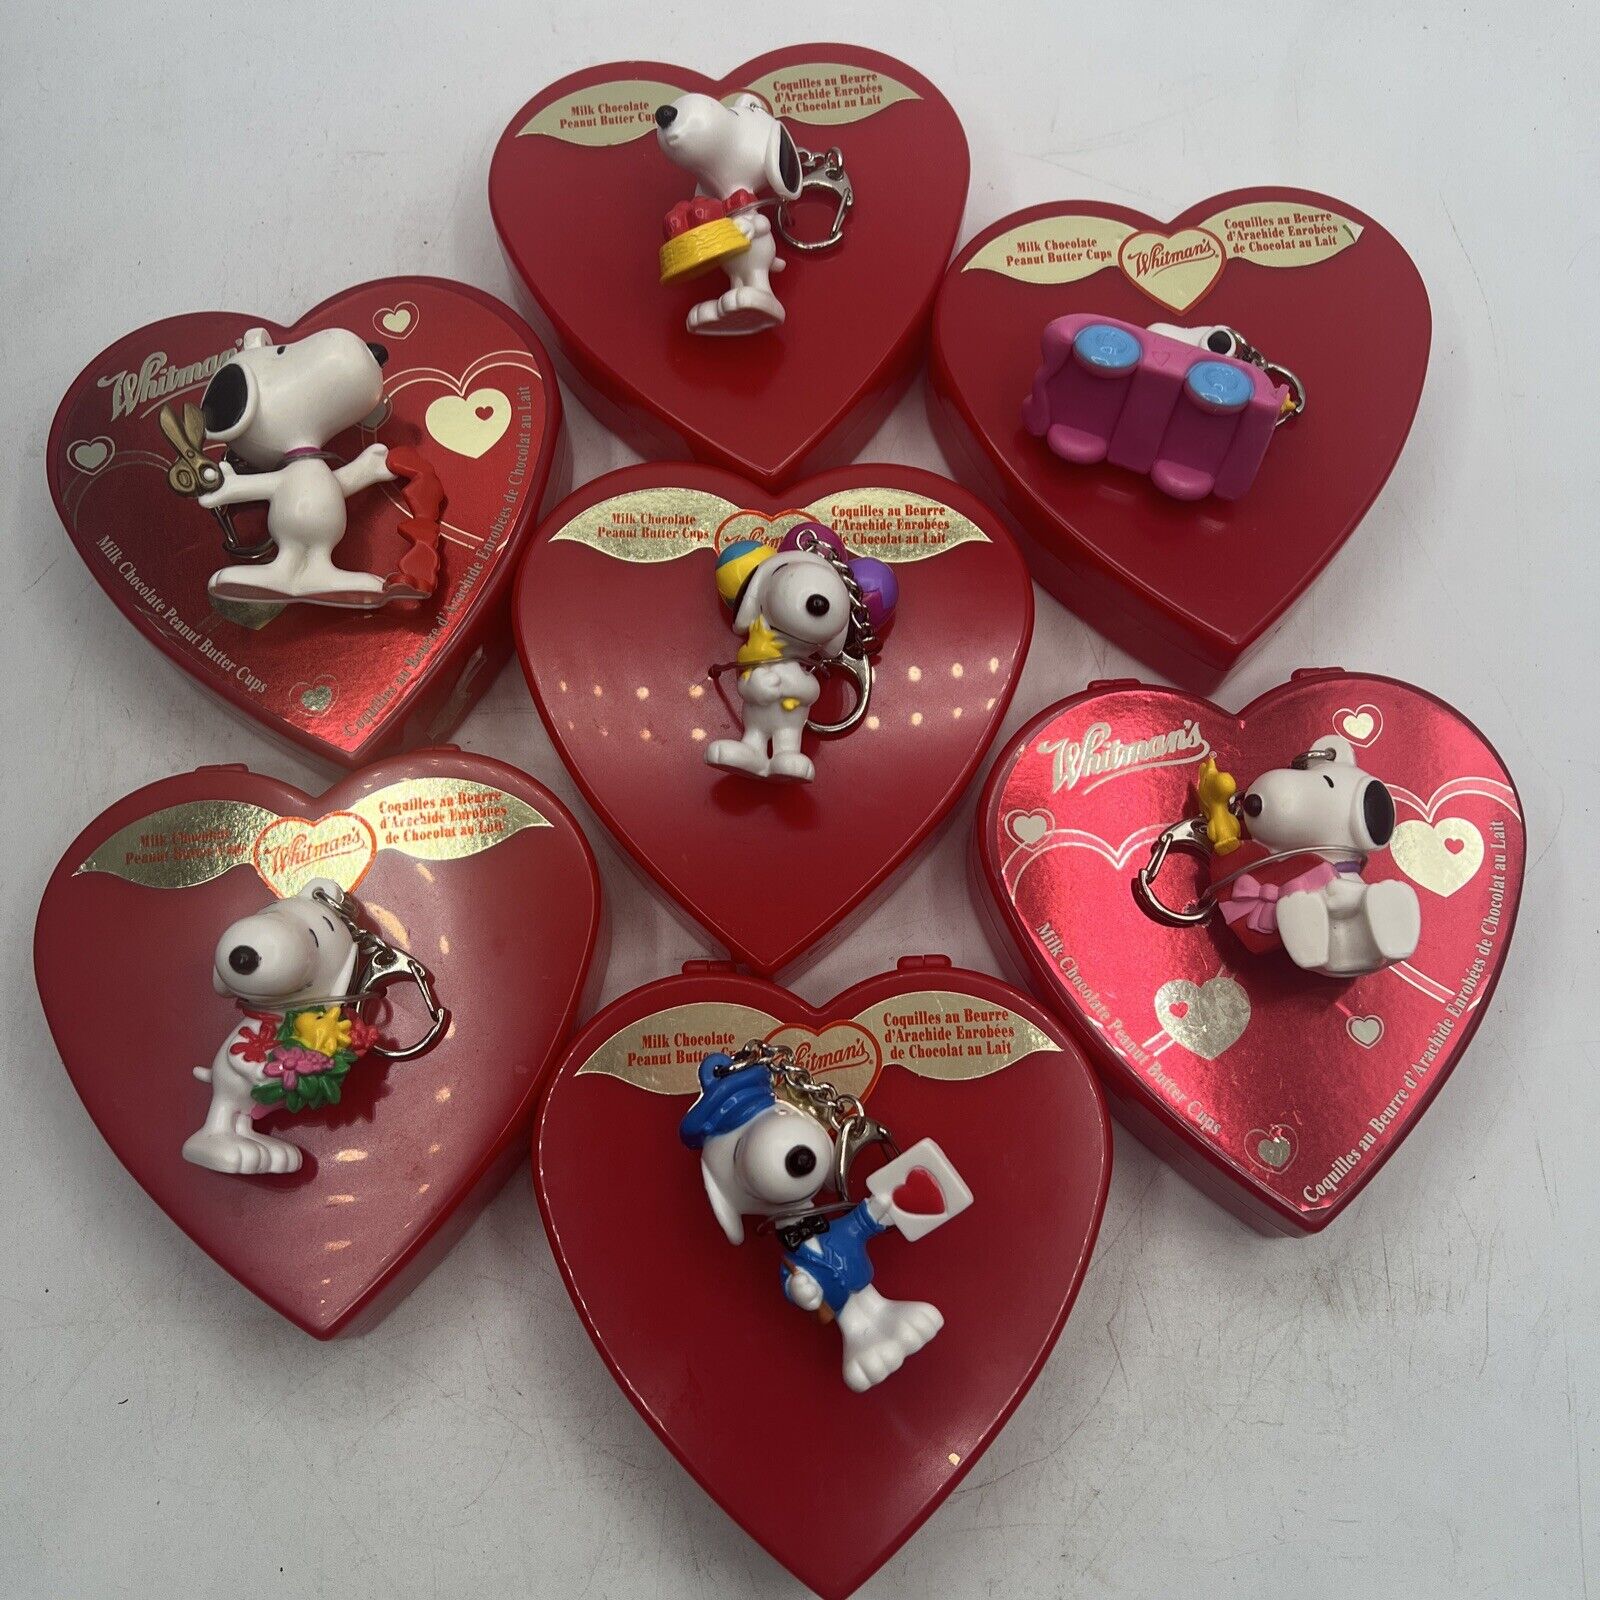 Peanuts Snoopy Whitman's Valentine Key Chains Attached to Plastic Heart Lot of 7